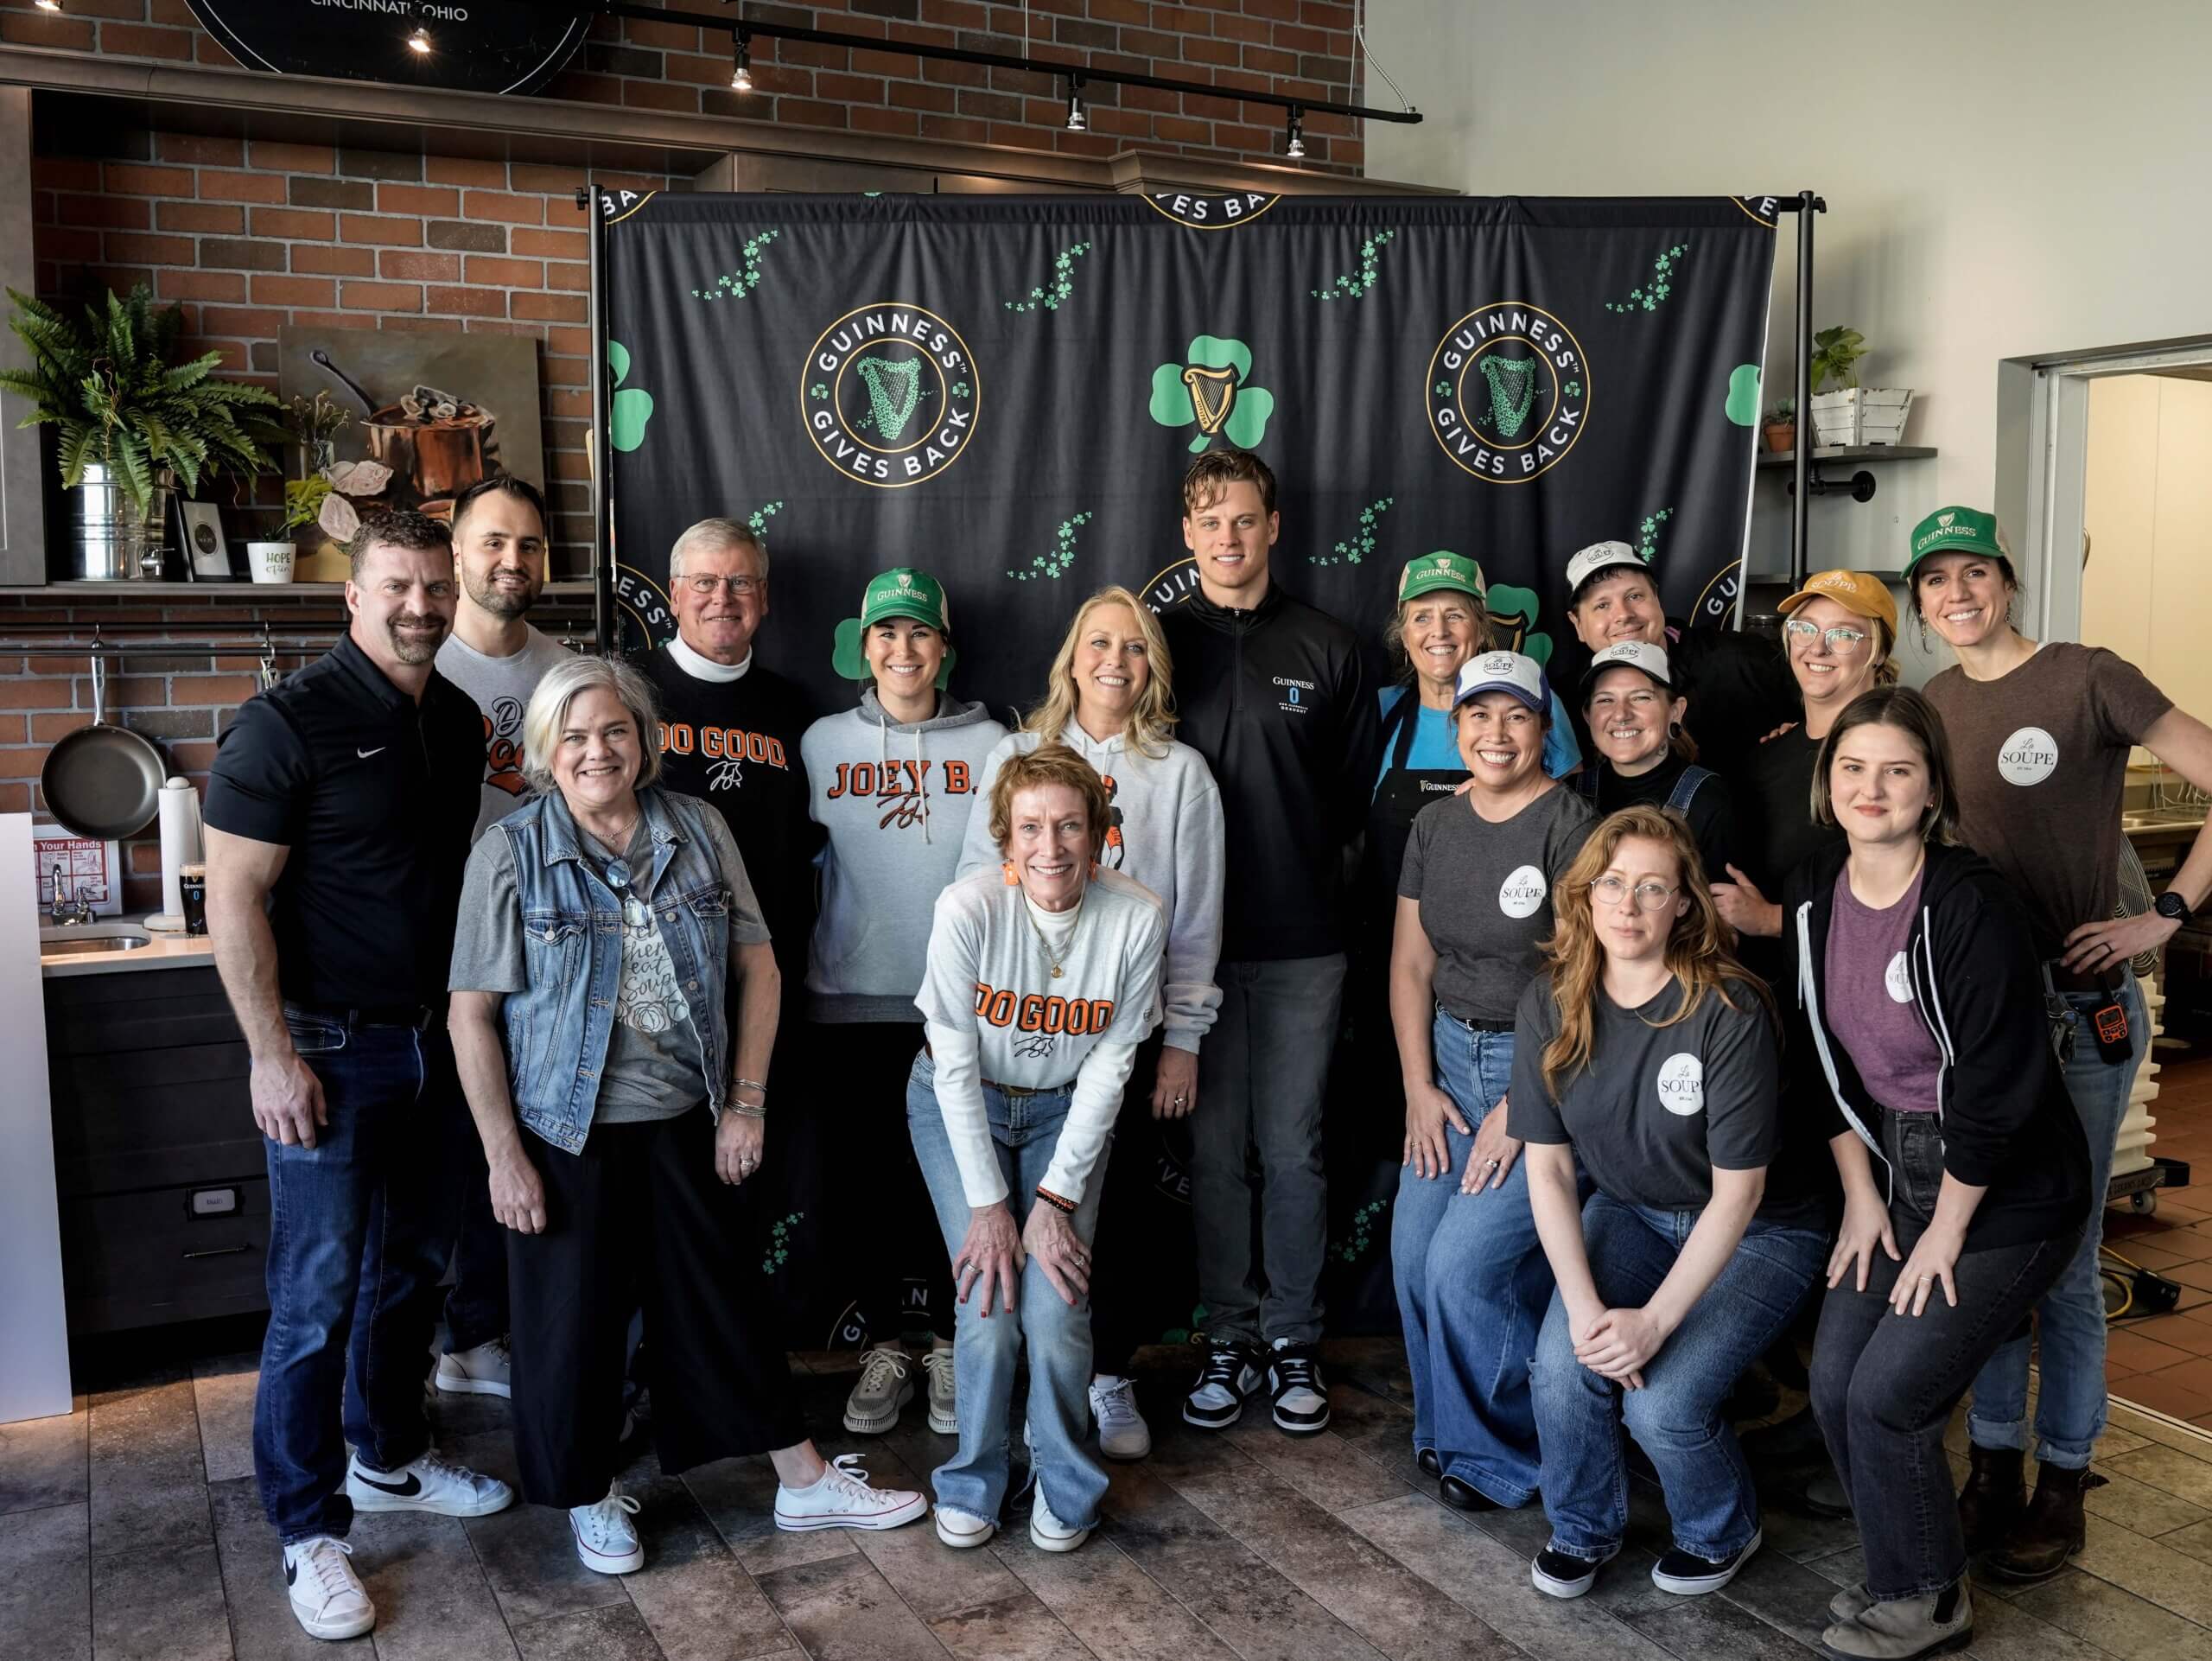 Joe Burrow, JBF, and the La Soupe team at the Guinness Gives Back event on March 3rd